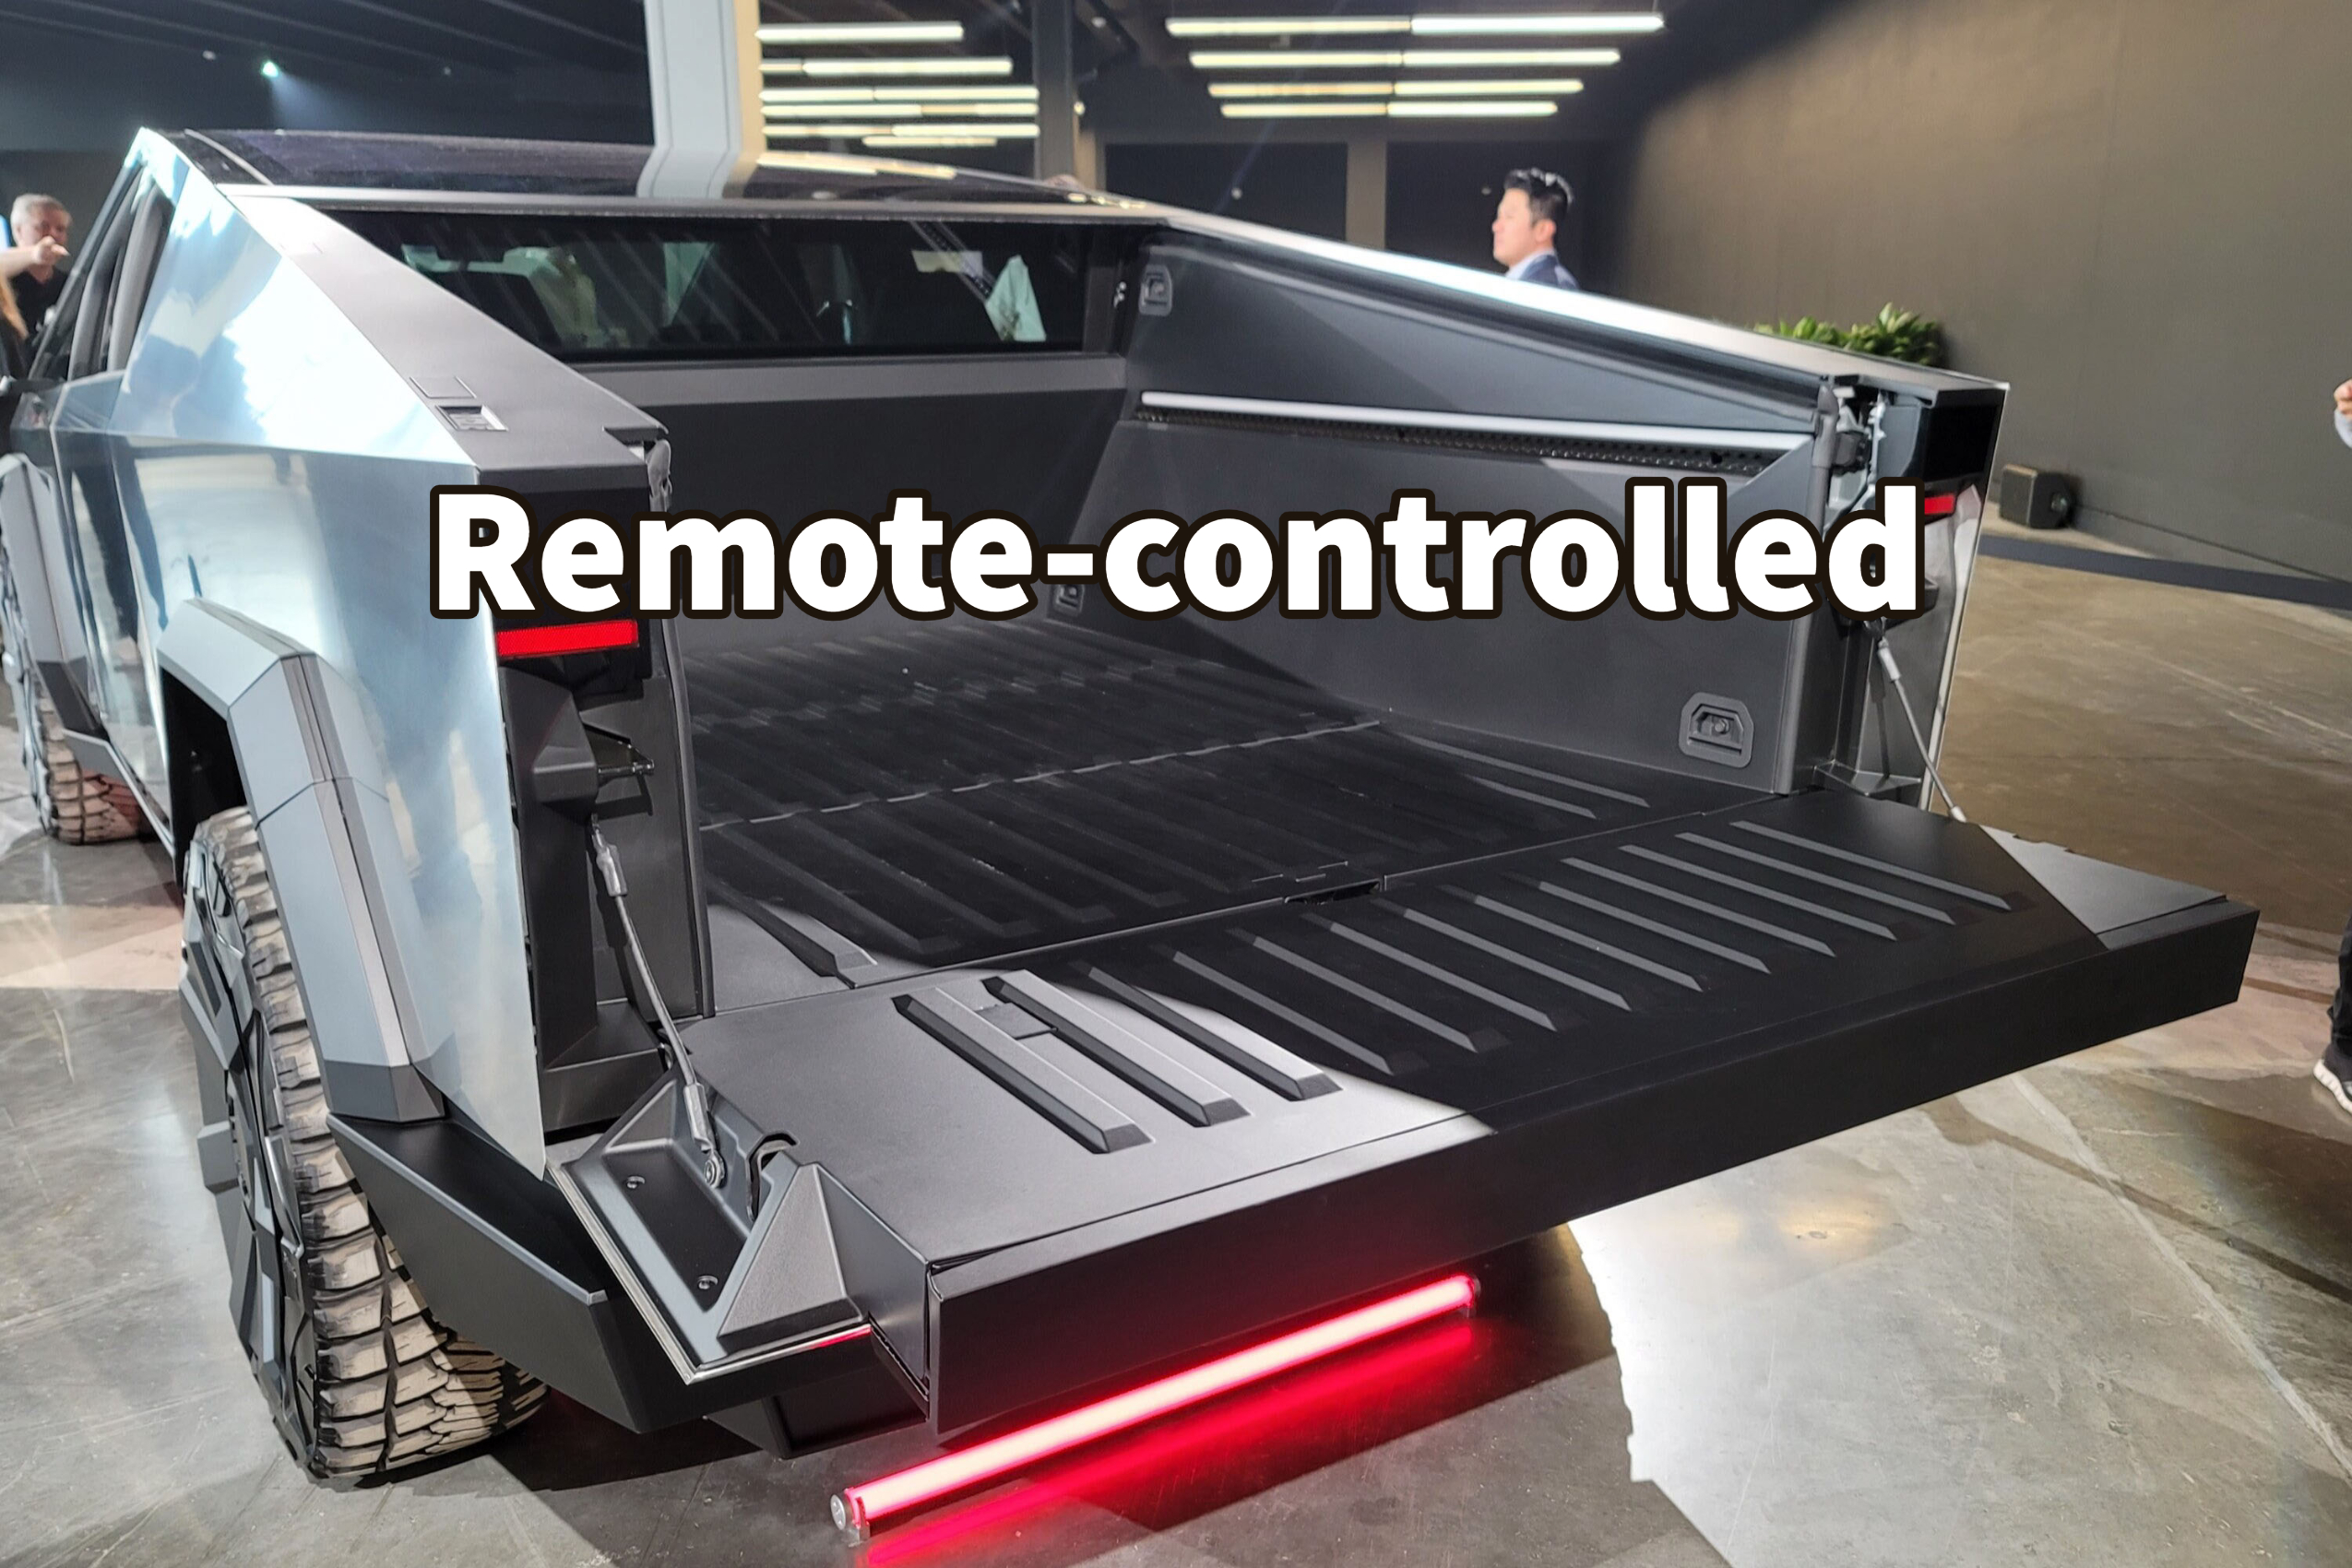 https://s1.cdn.autoevolution.com/images/news/tesla-patents-remote-controlled-powered-tailgate-for-the-cybertruck-216994_1.jpg